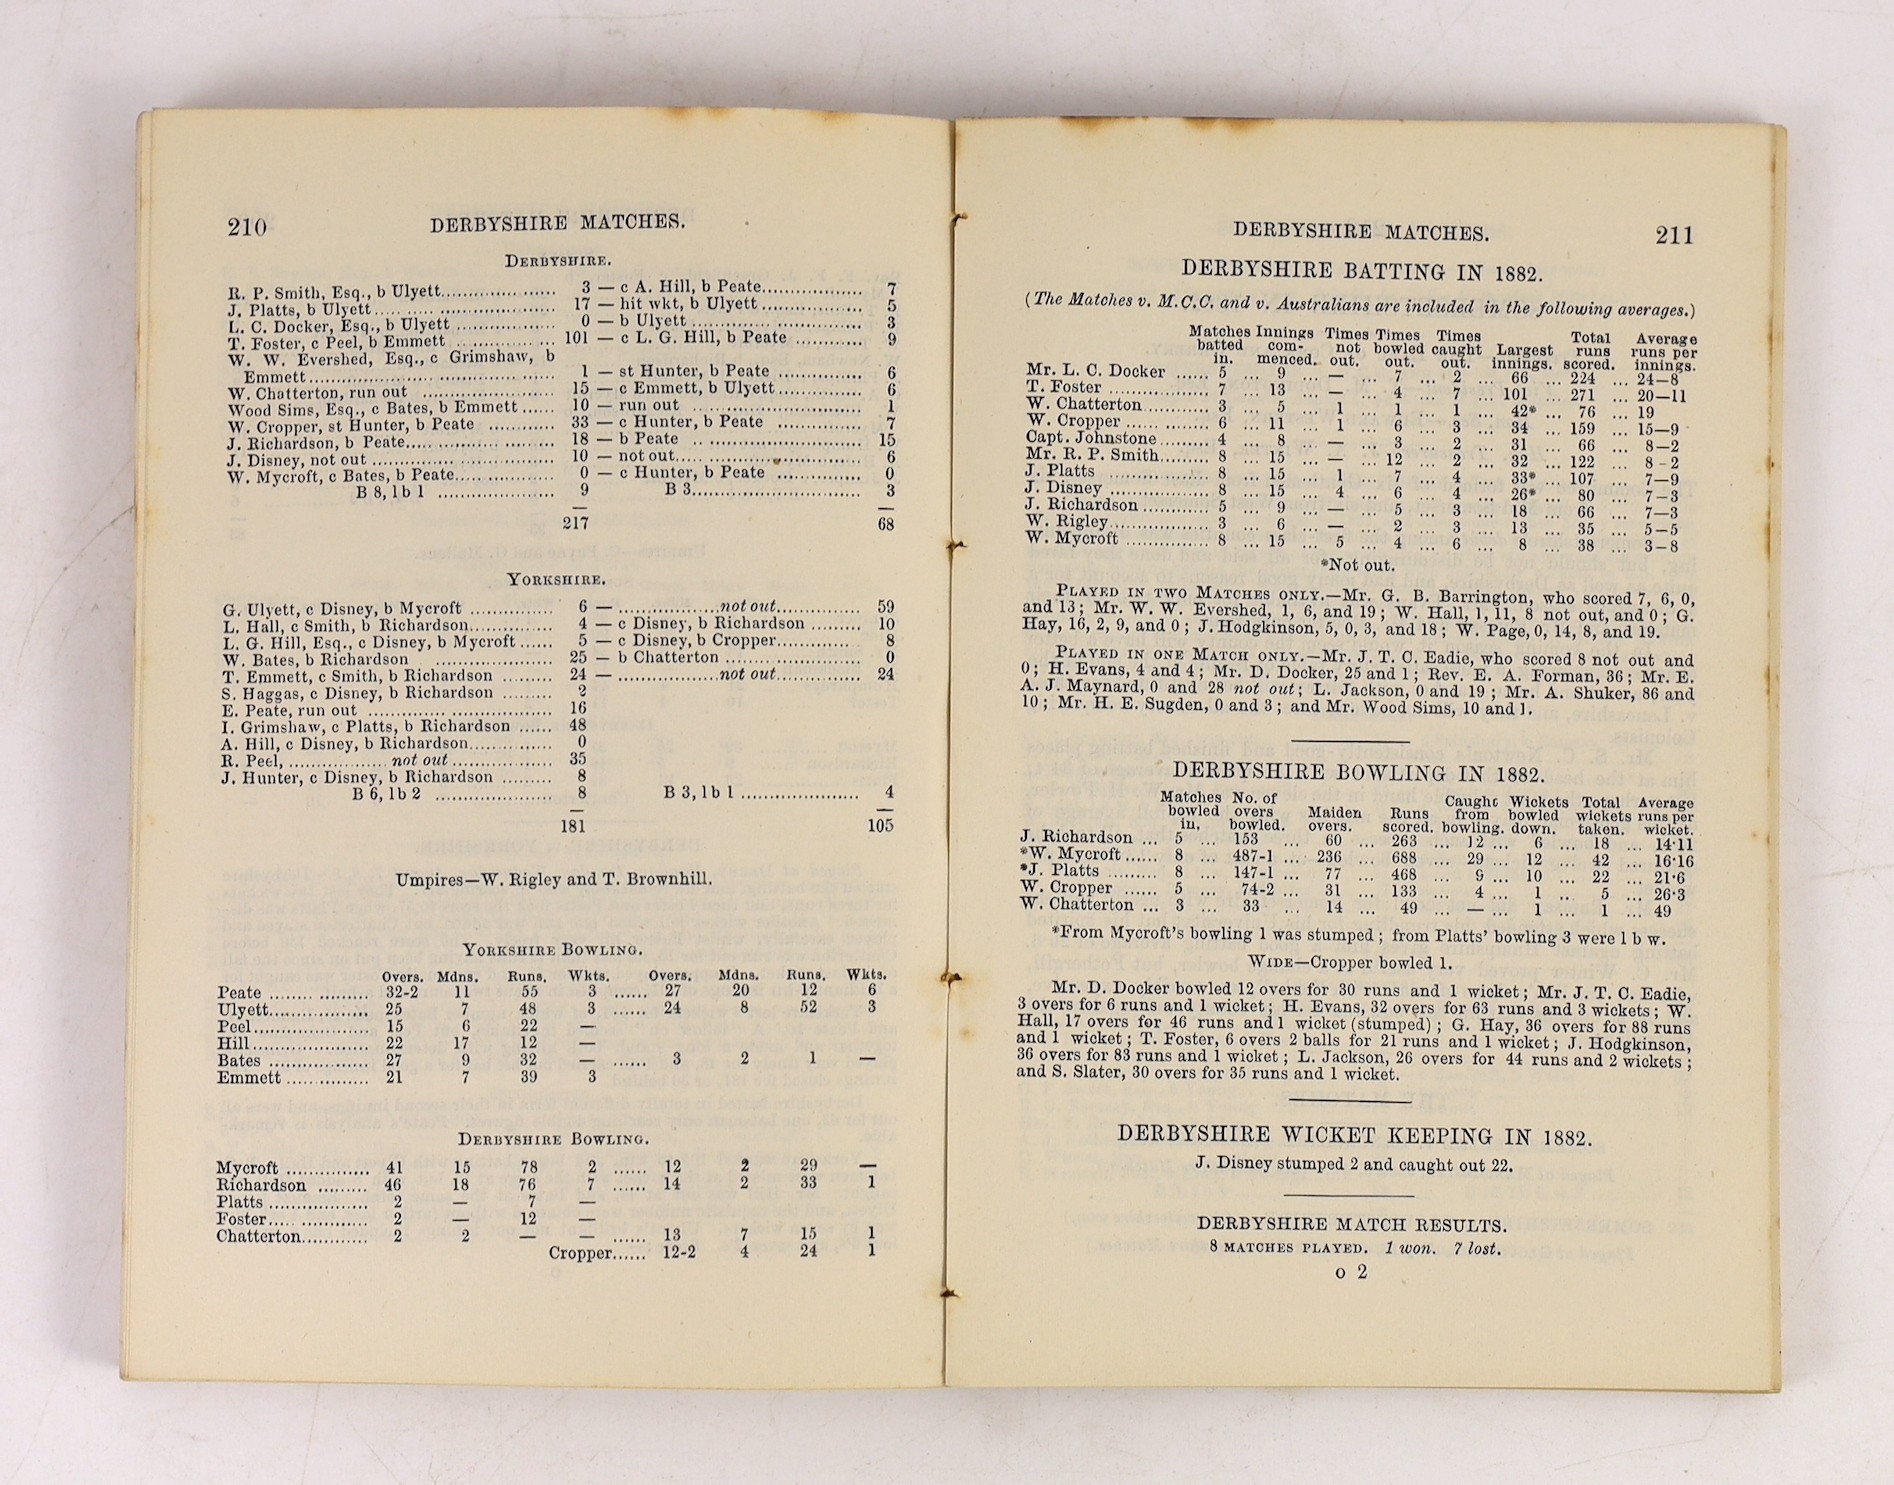 Wisden, John - Cricketers’ Almanack for 1883, 20th edition, original paper wrappers, spotting to early advertisements, title, endpapers and page edges.